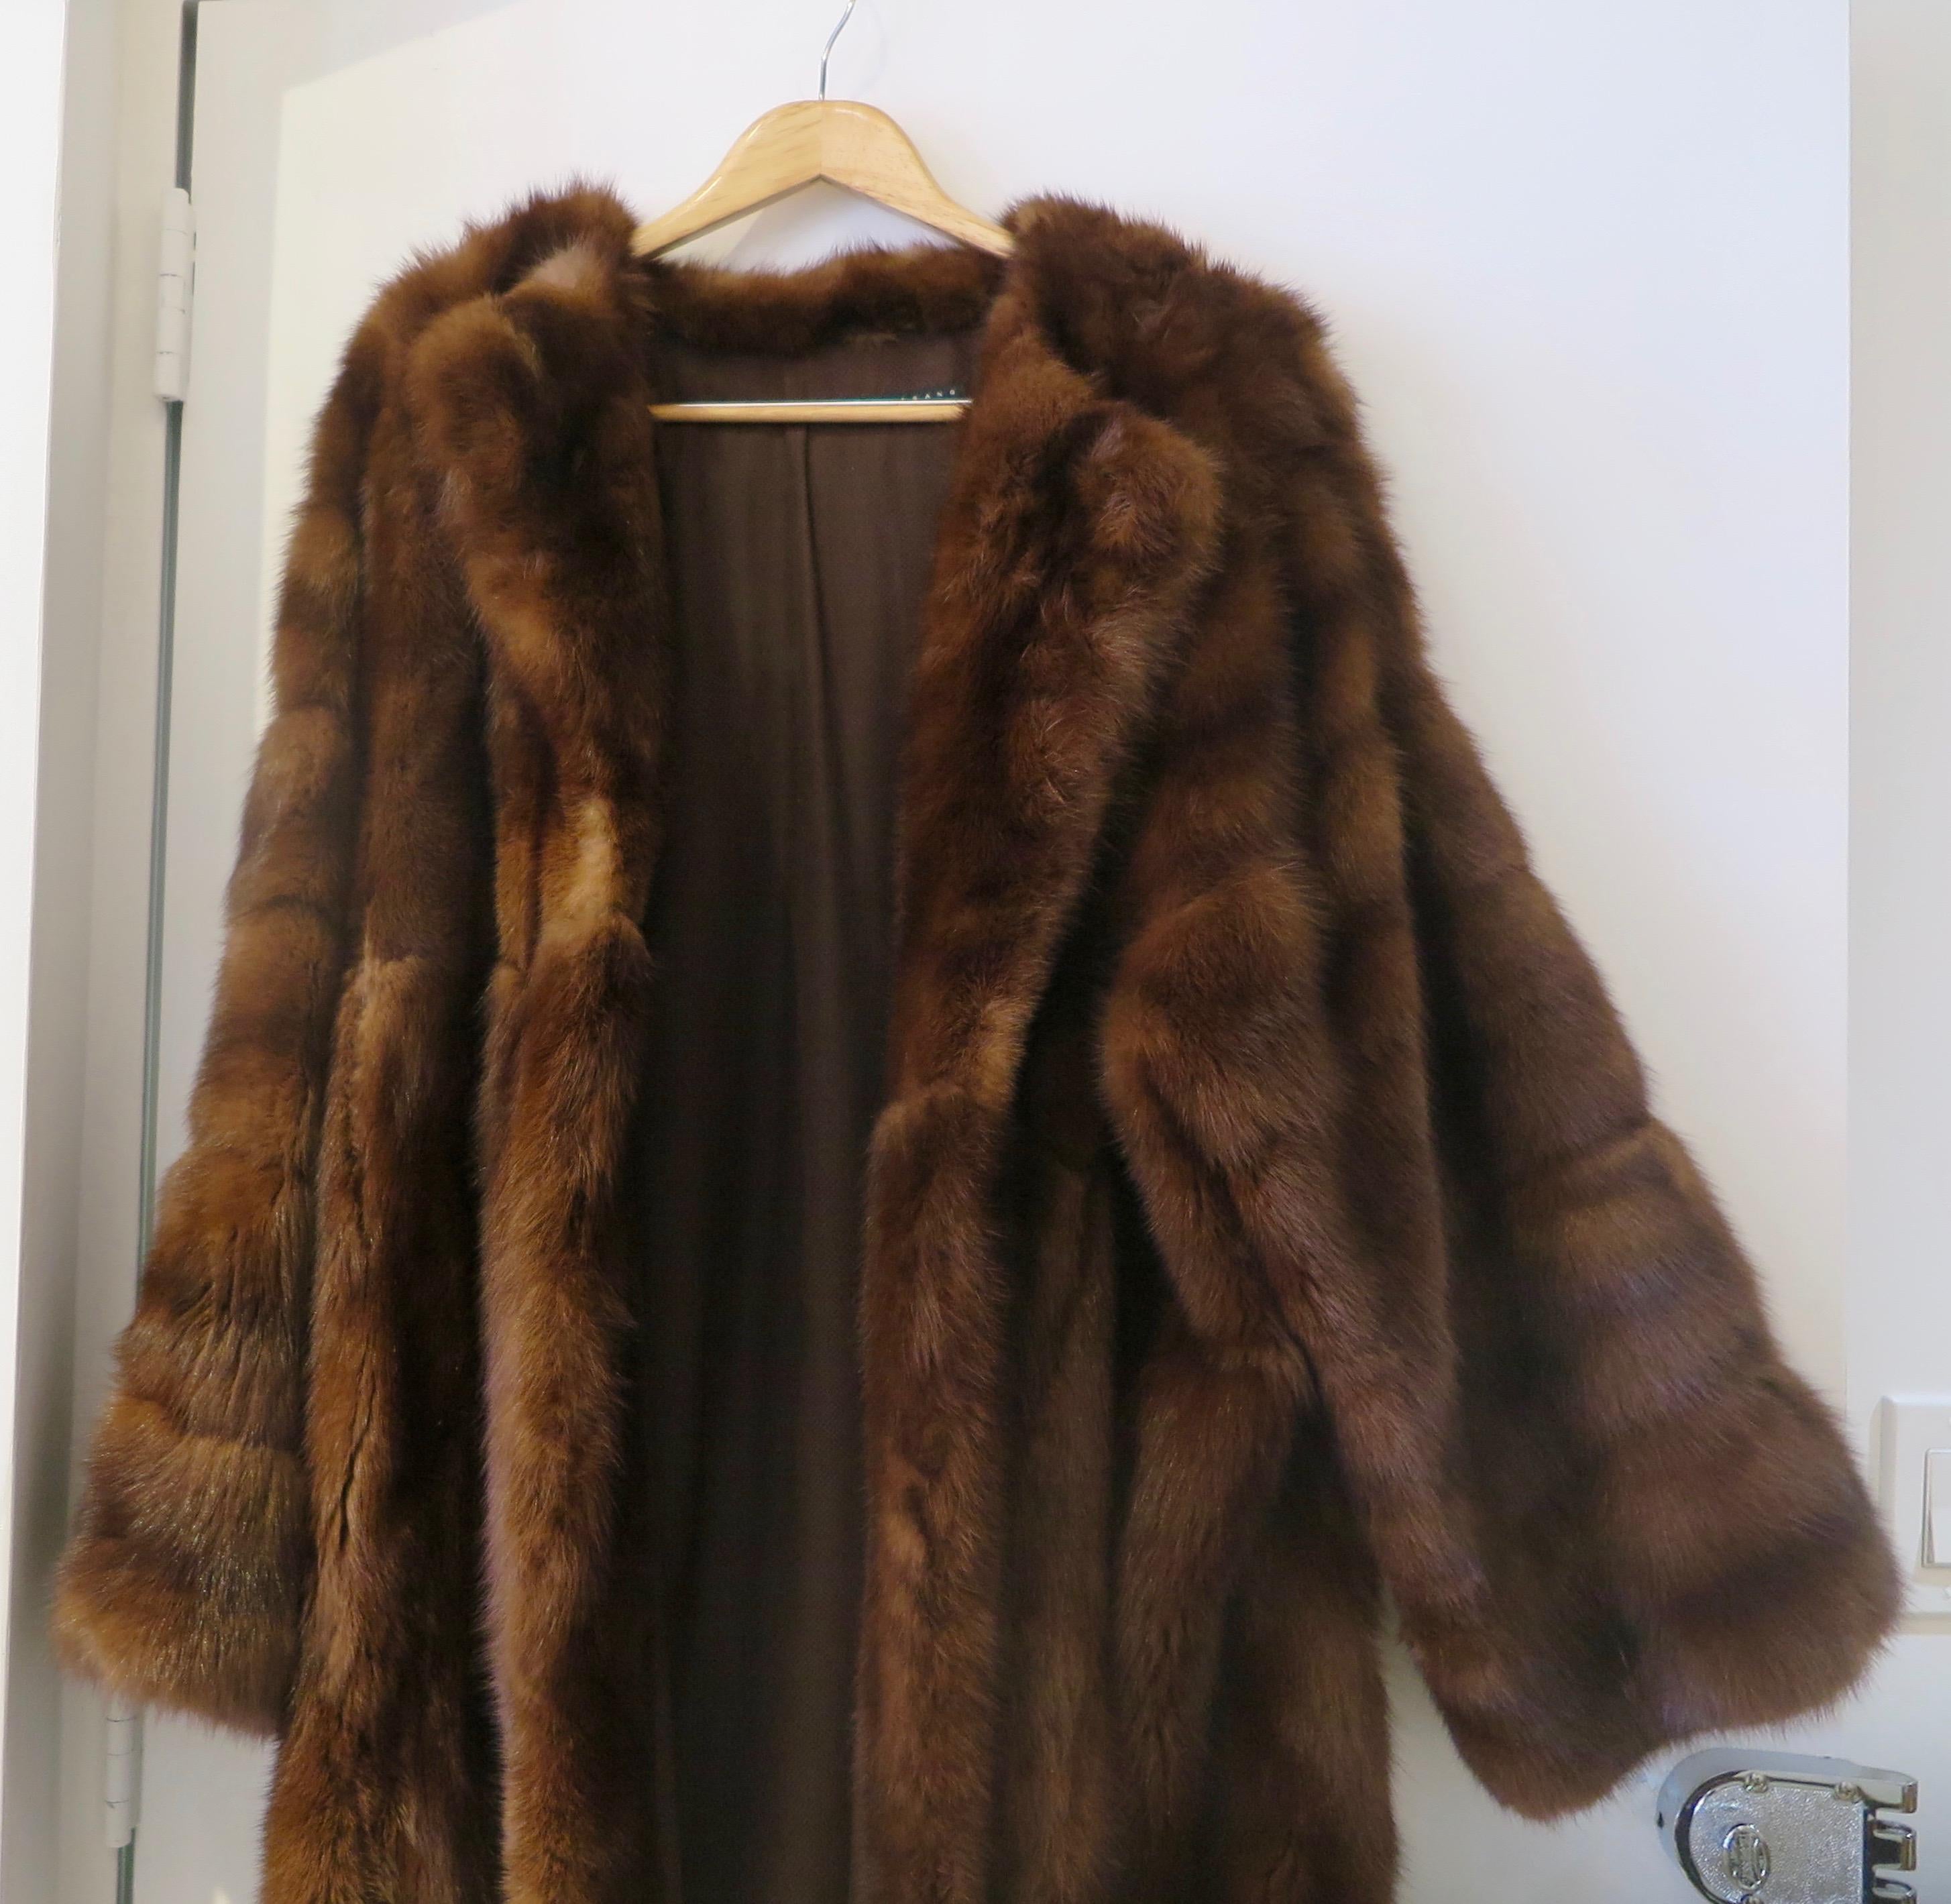 Full Length Kimono Shape Russian Sable Coat by Bisang Fourrures, Switzerland In Good Condition For Sale In New York, NY